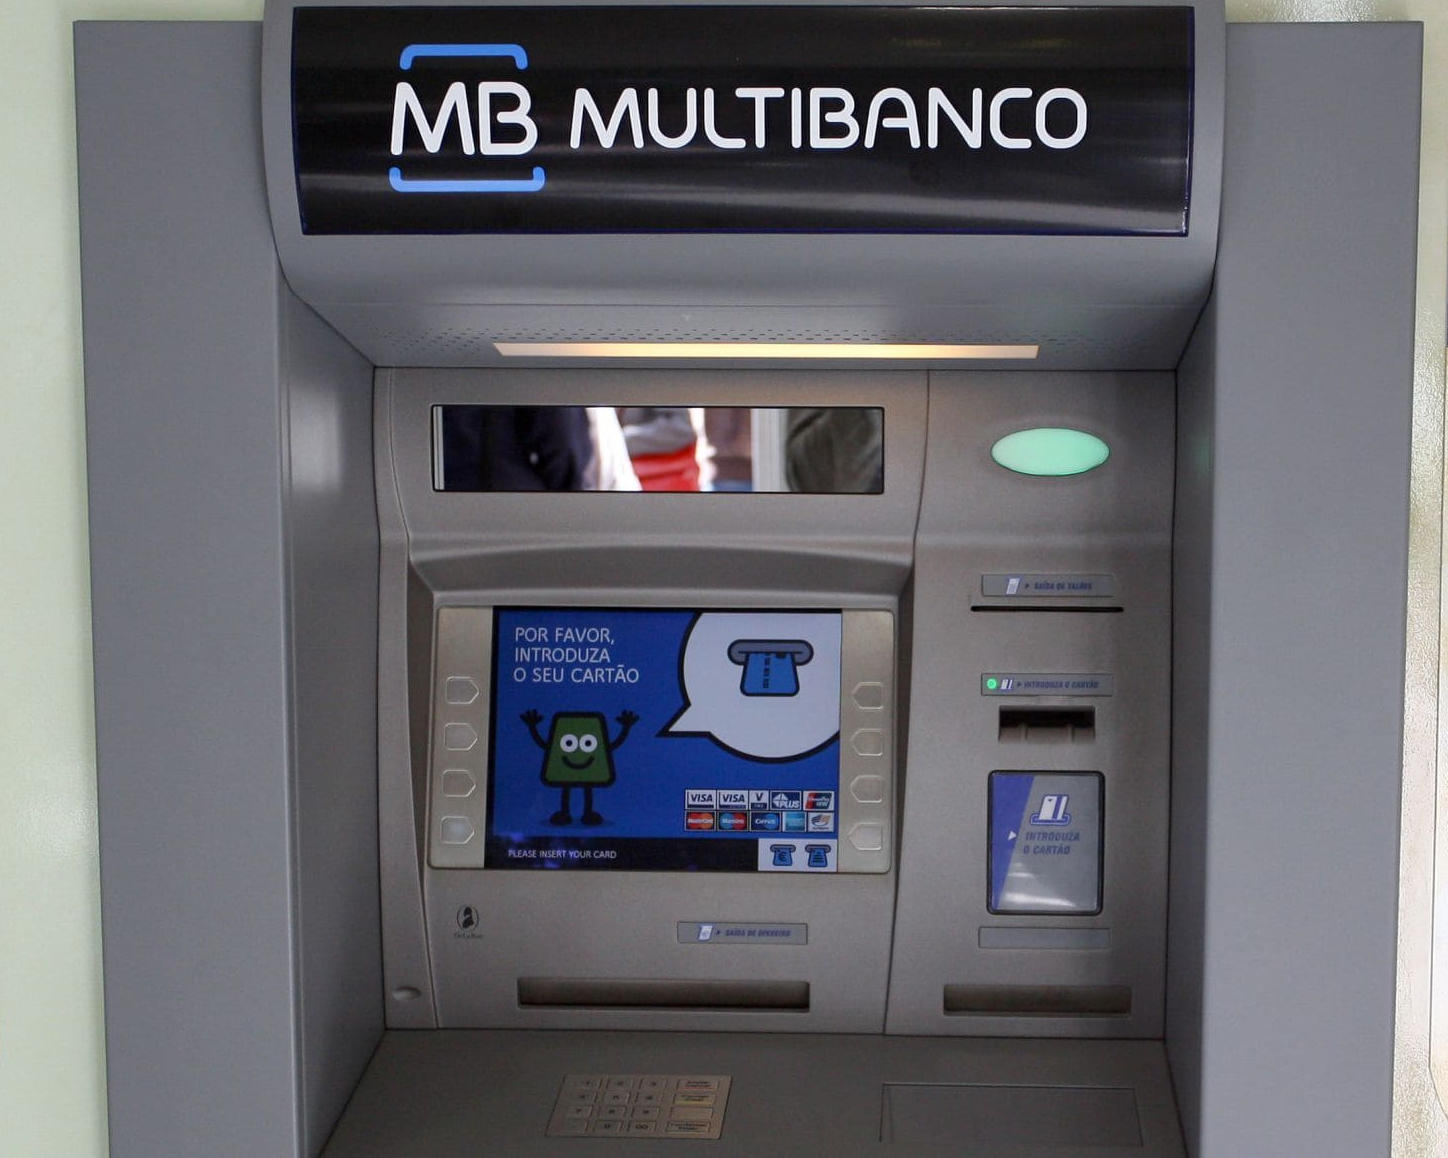 For hassle-free currency exchange, look no further than Multibanco ATMs. These are the preferred ATMs for exchanging your money in Lisbon.